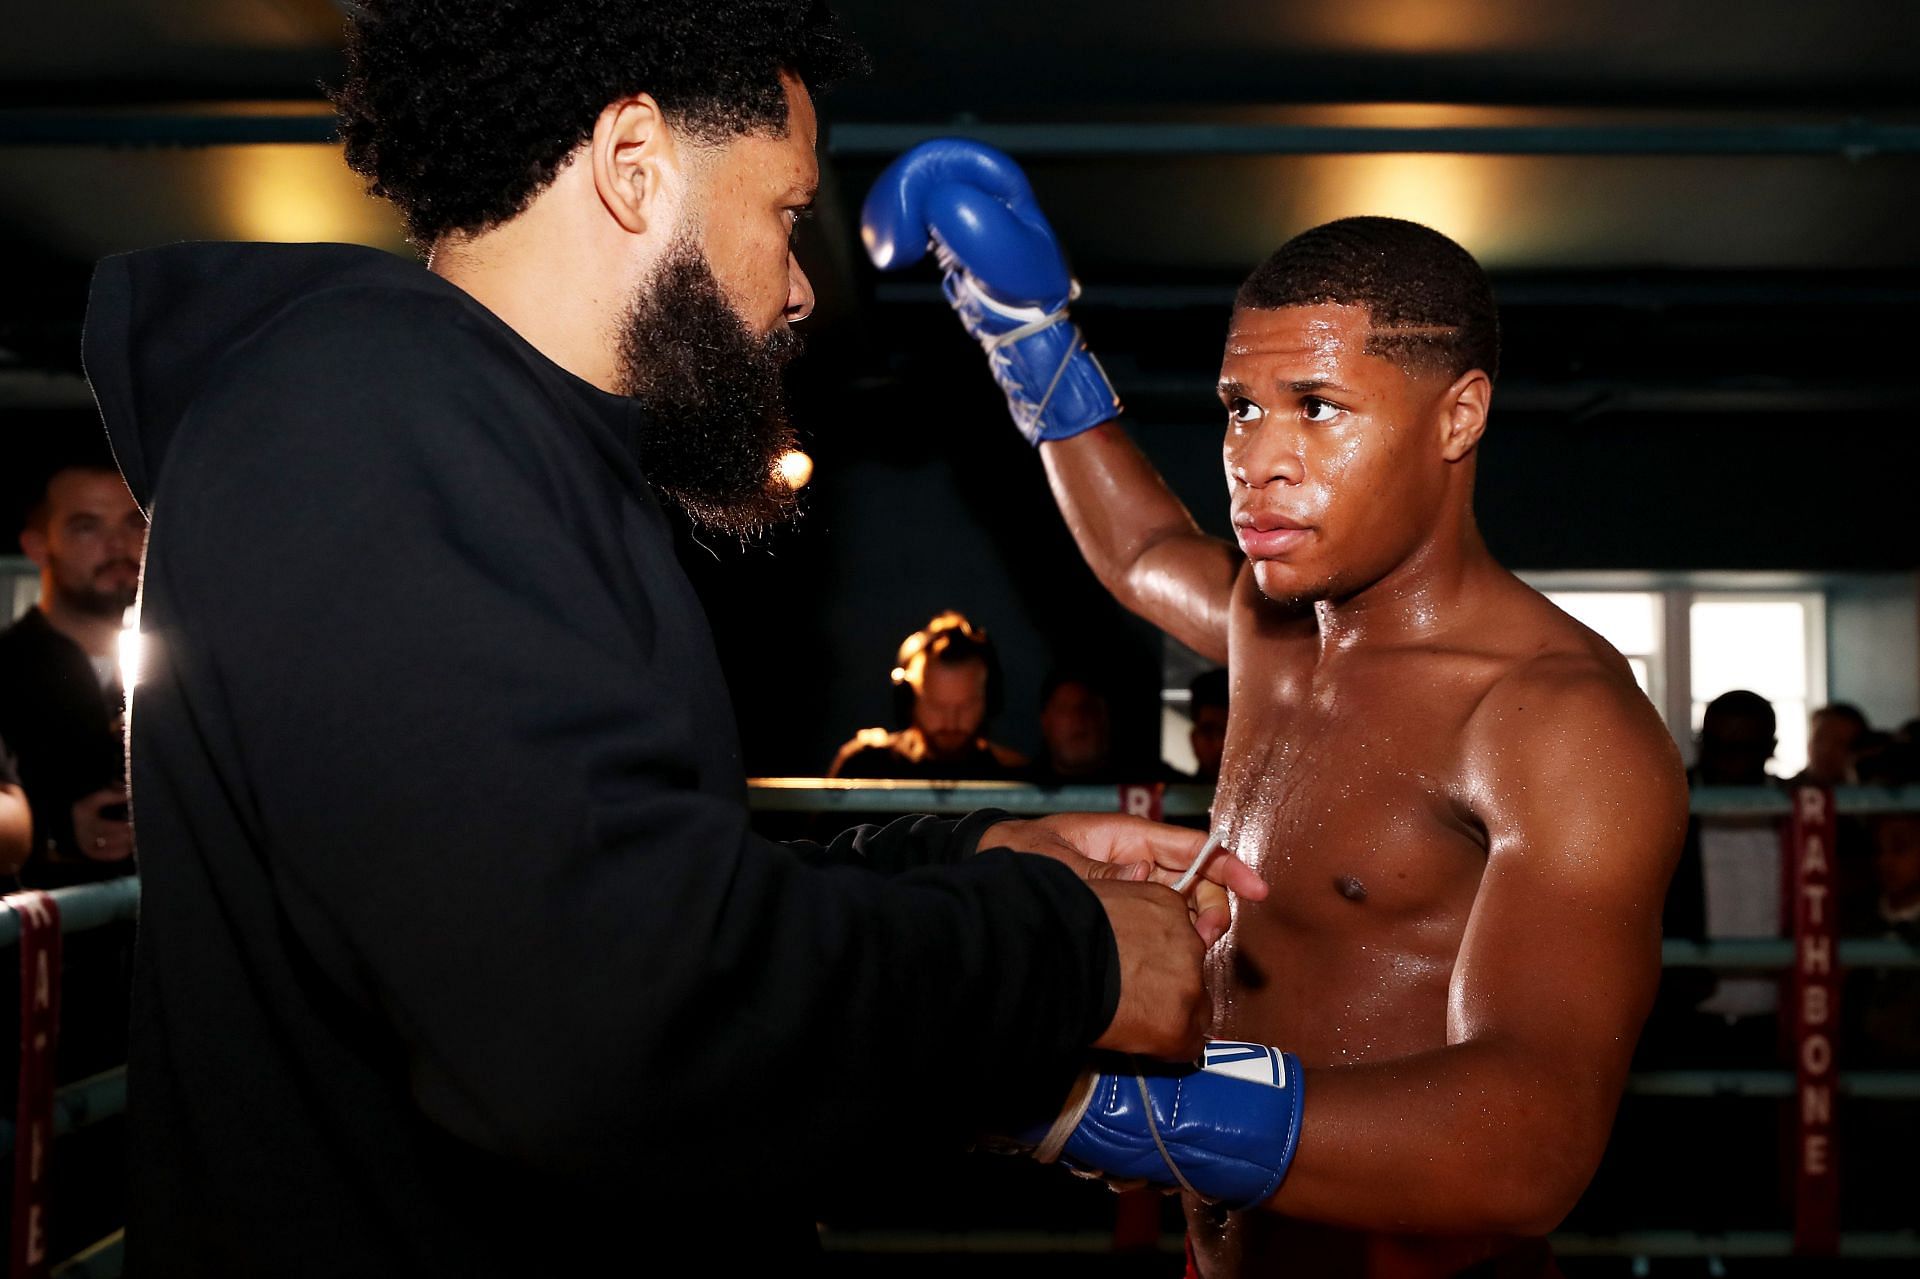 Bill Haney (left) and Devin Haney (right) [Getty Images]